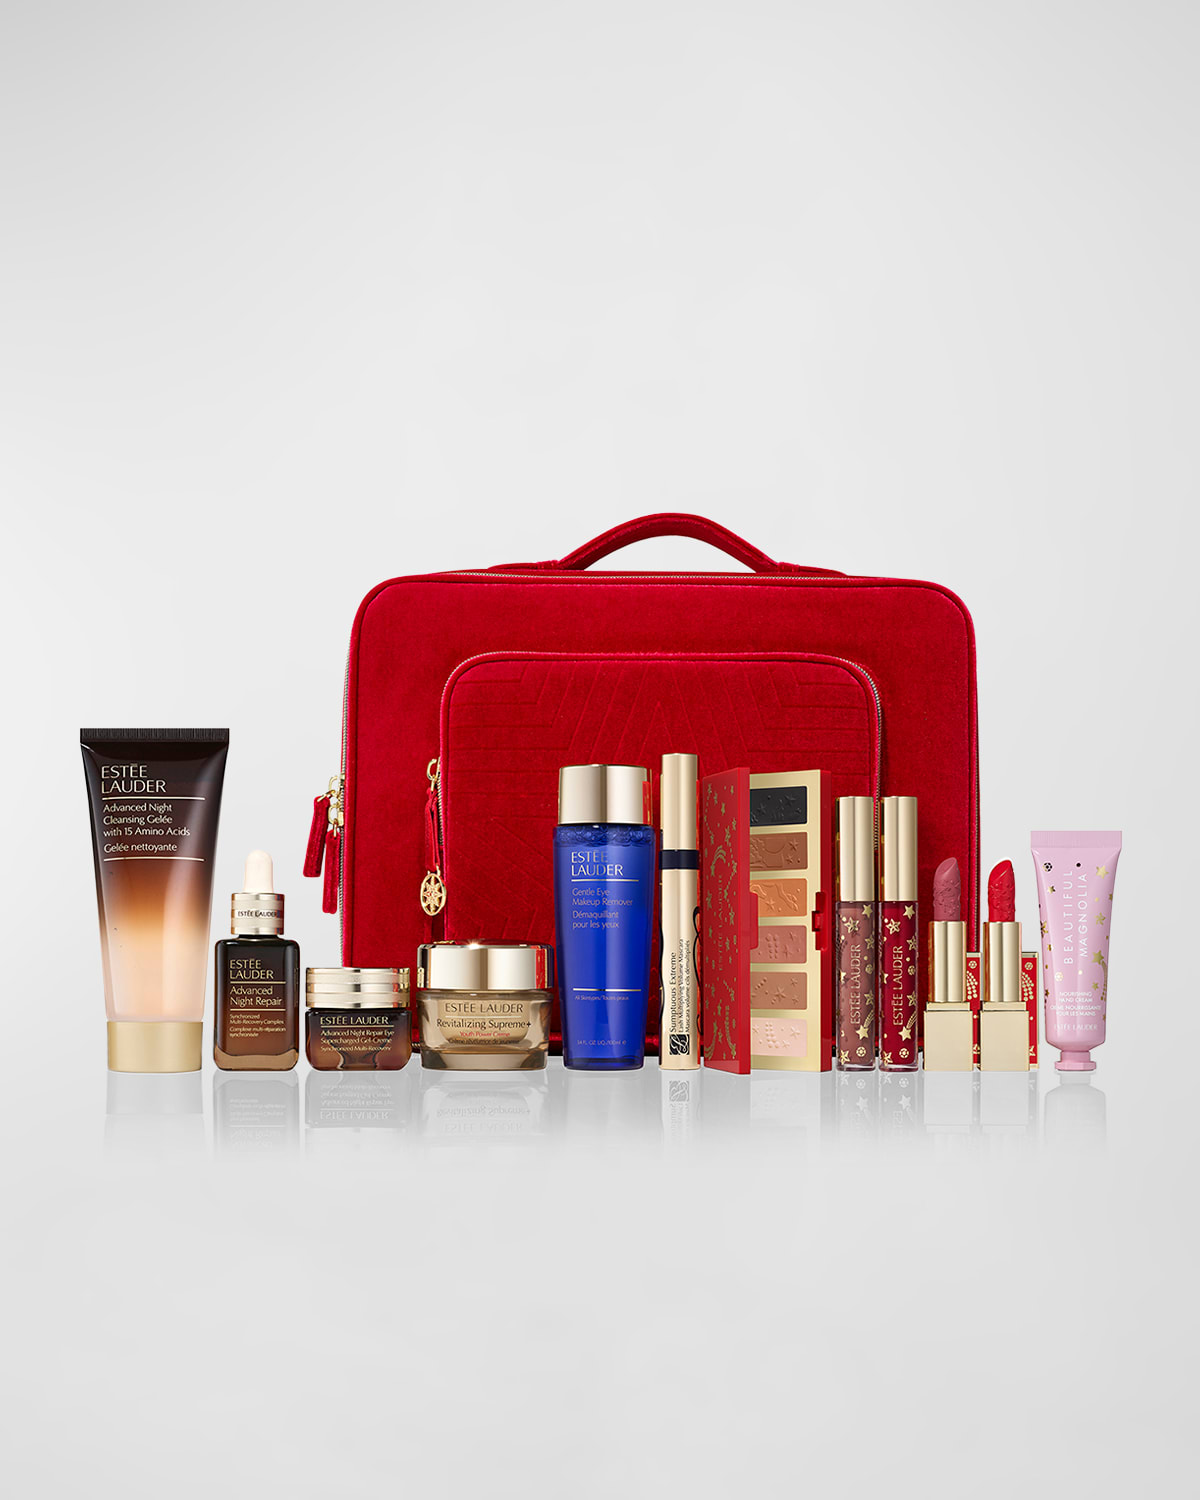 11 Full-Size Favorites & More Gift Set - $85 With Any Estee Lauder Purchase - A $615 Value